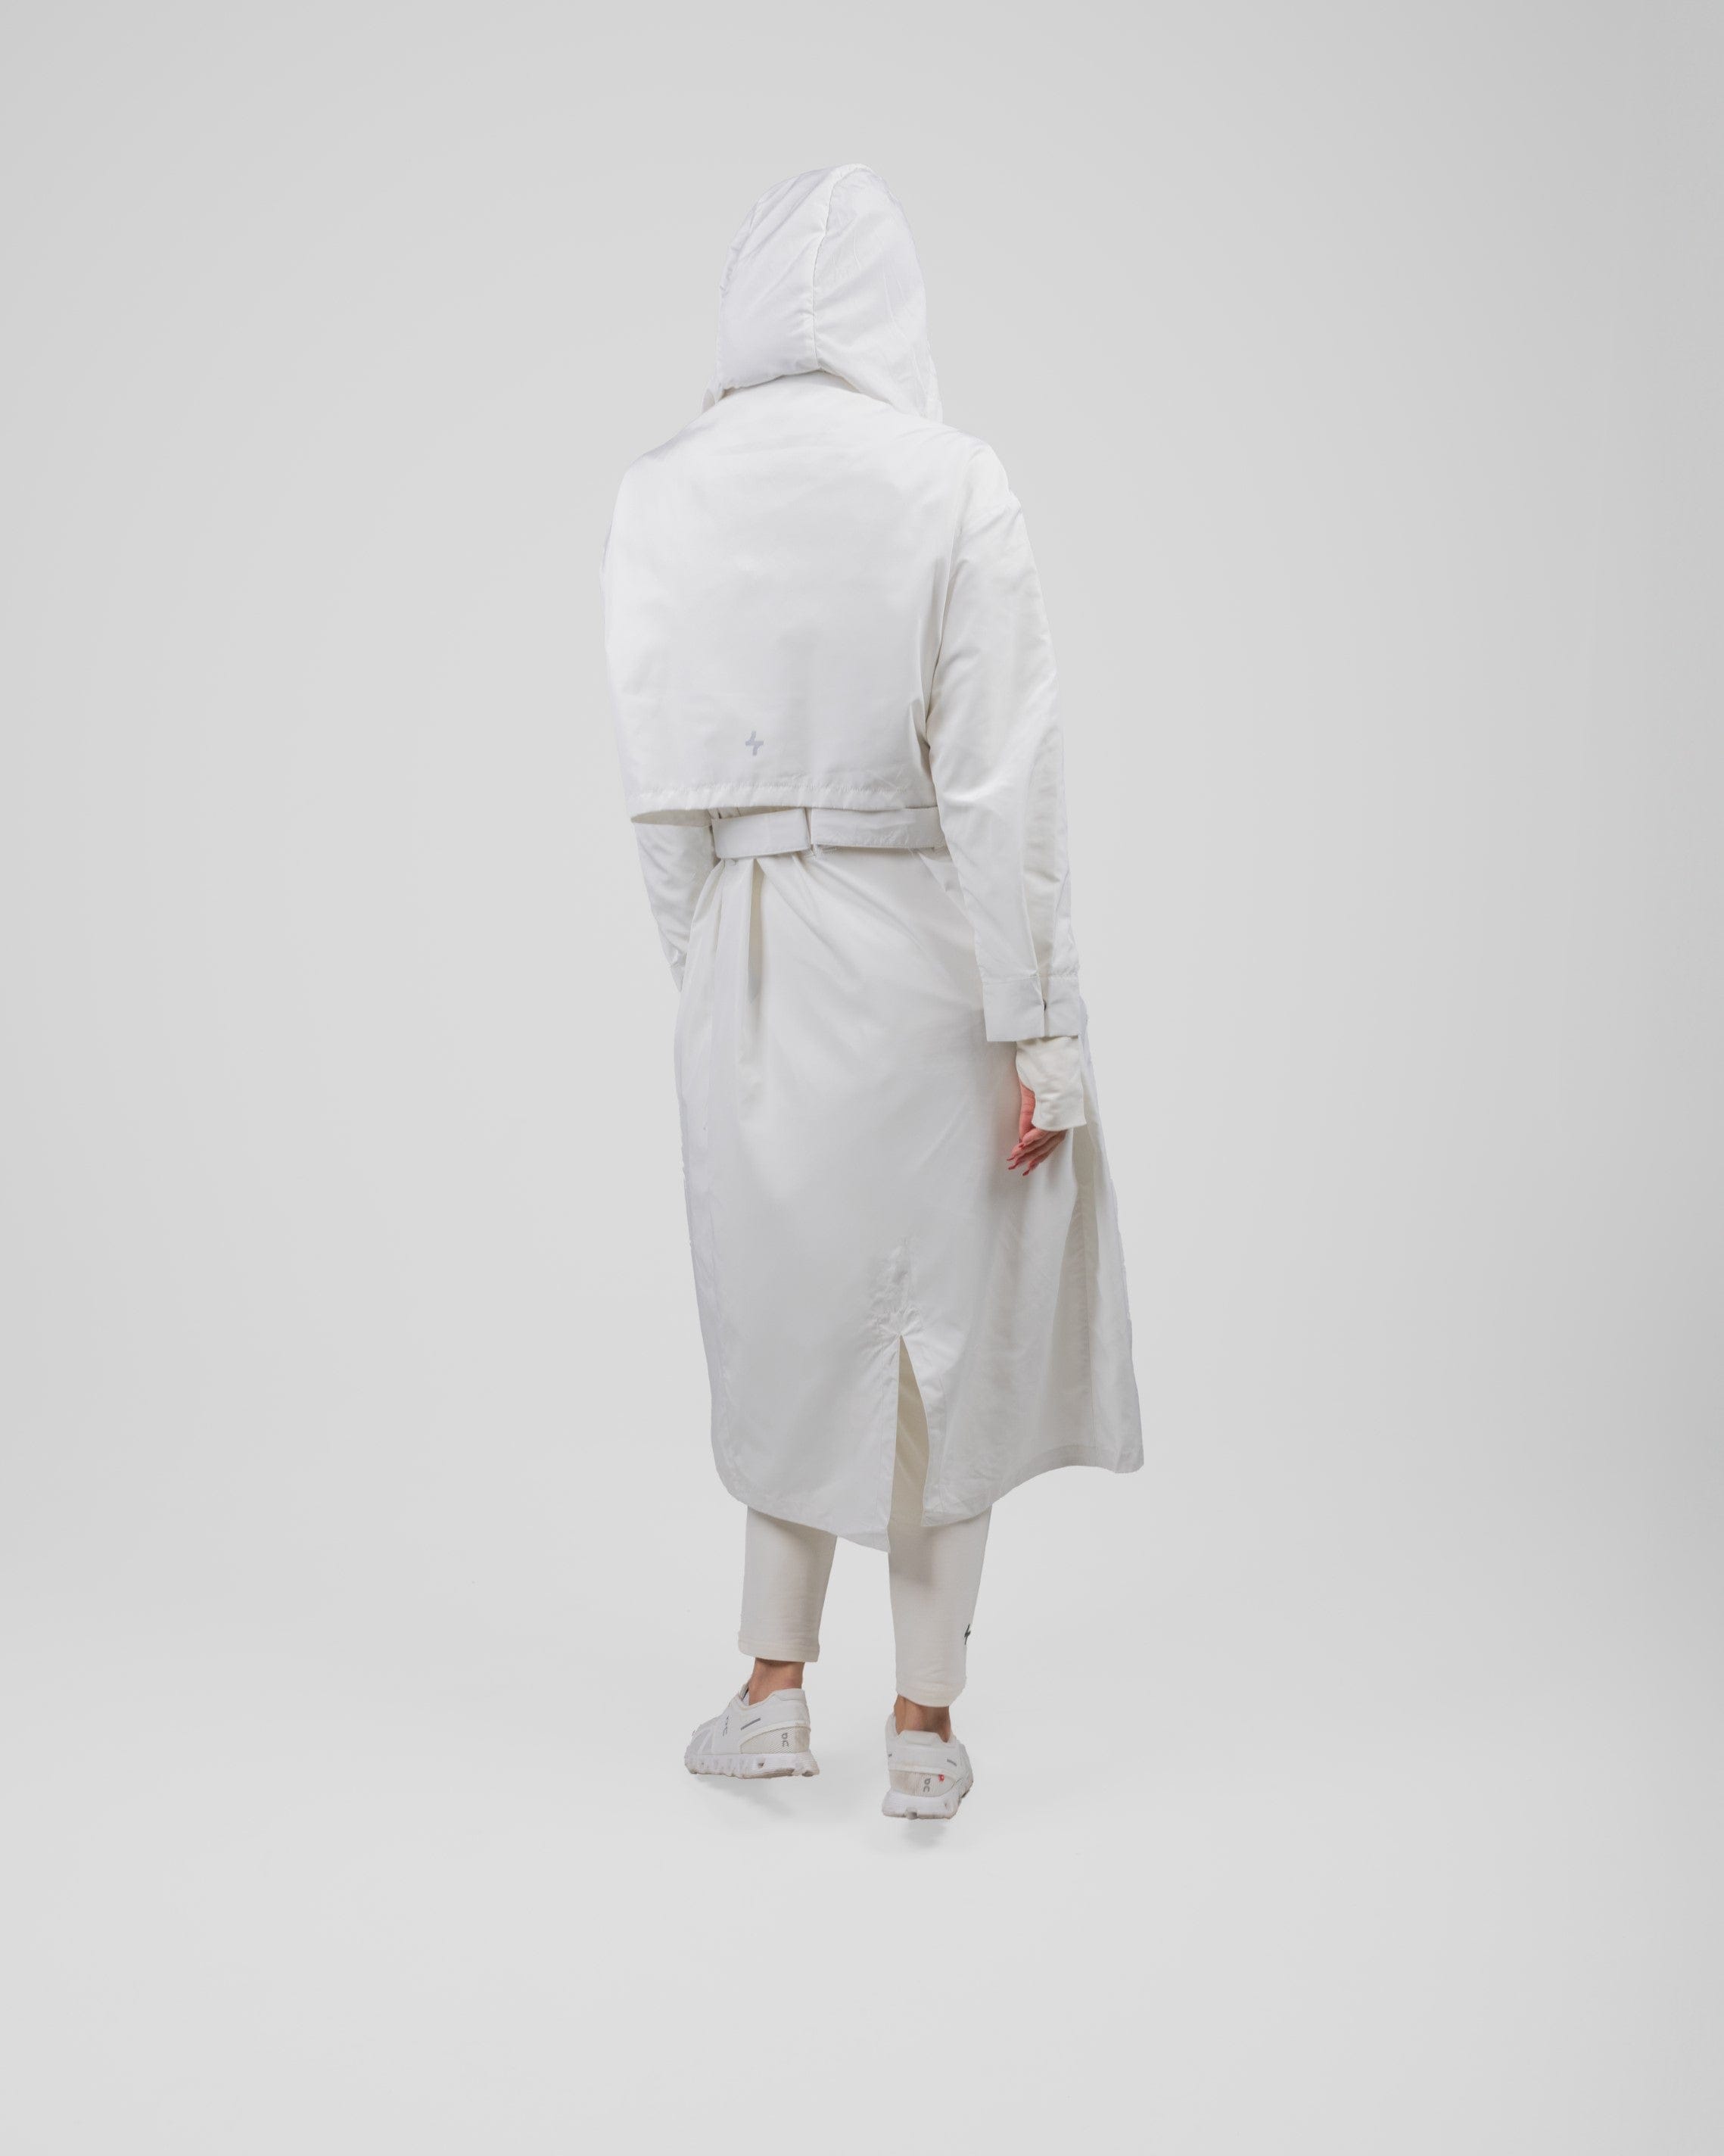 A model from behind wearing a Off White MAK LIGHT PARKA by Qynda with a hood and white breathable mesh sneakers, walking to the right on a plain light gray background.